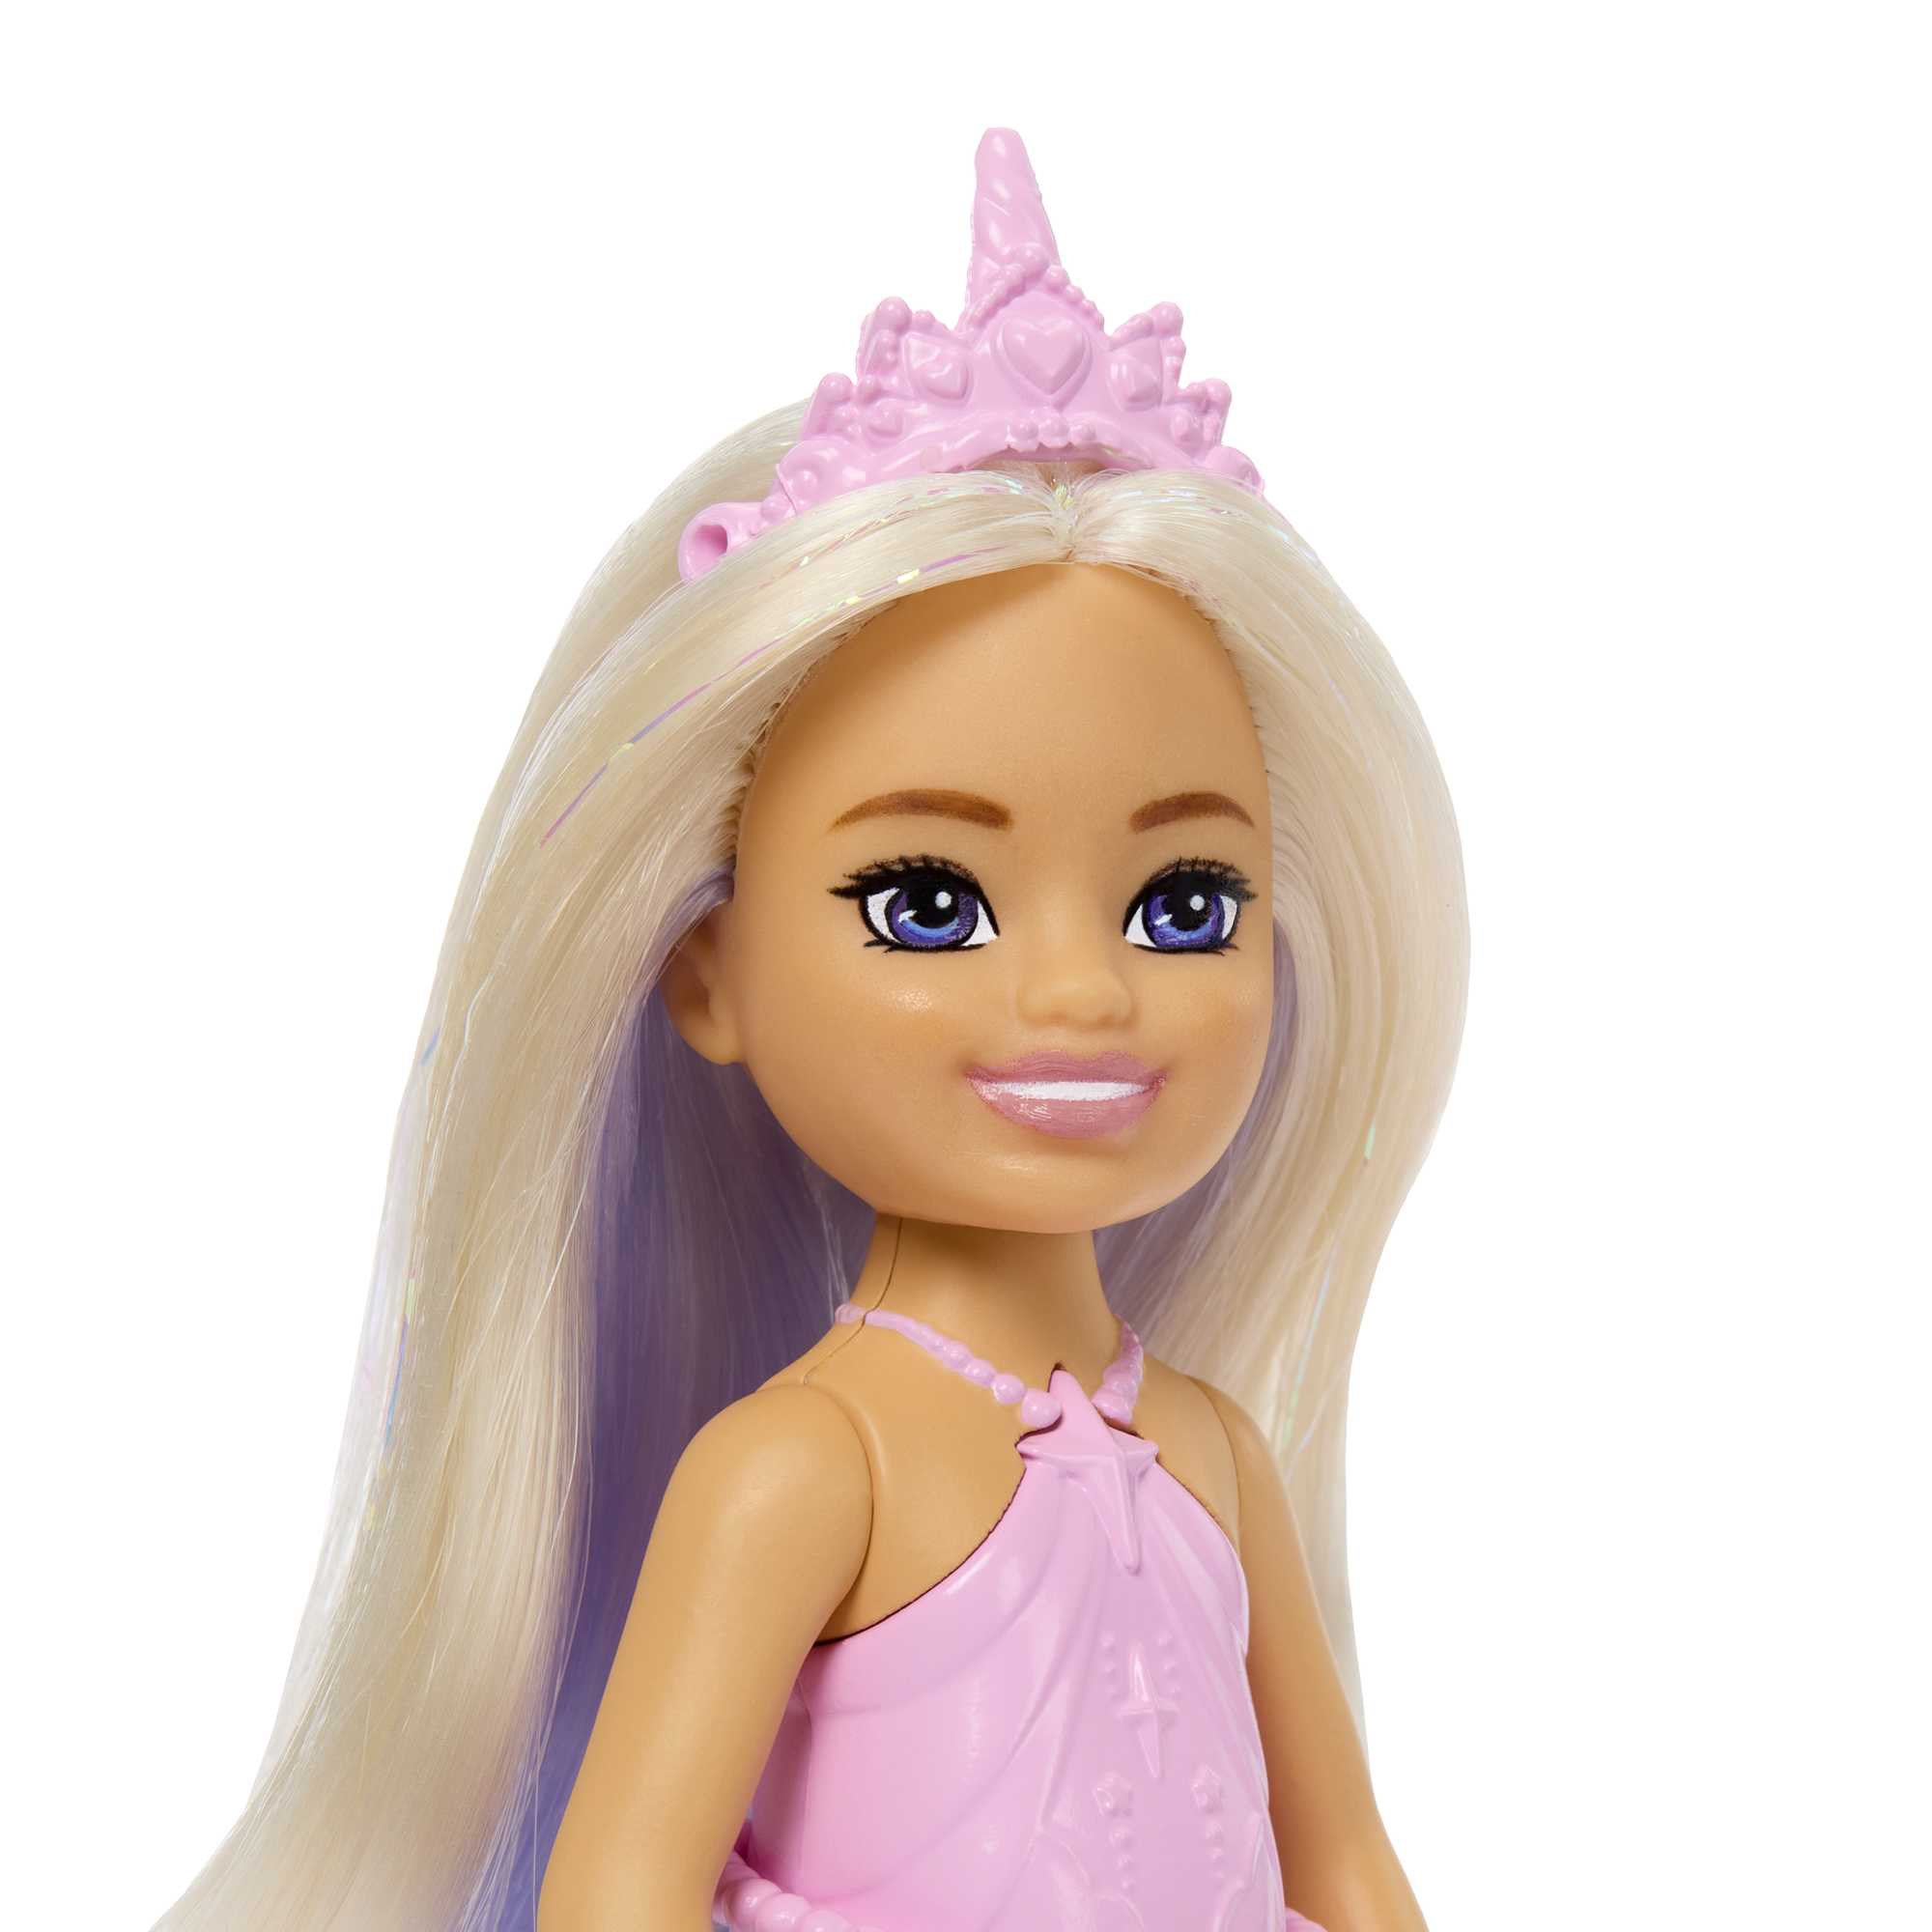 This Barbie Chelsea doll is a magical unicorn girl with lavender hair ...